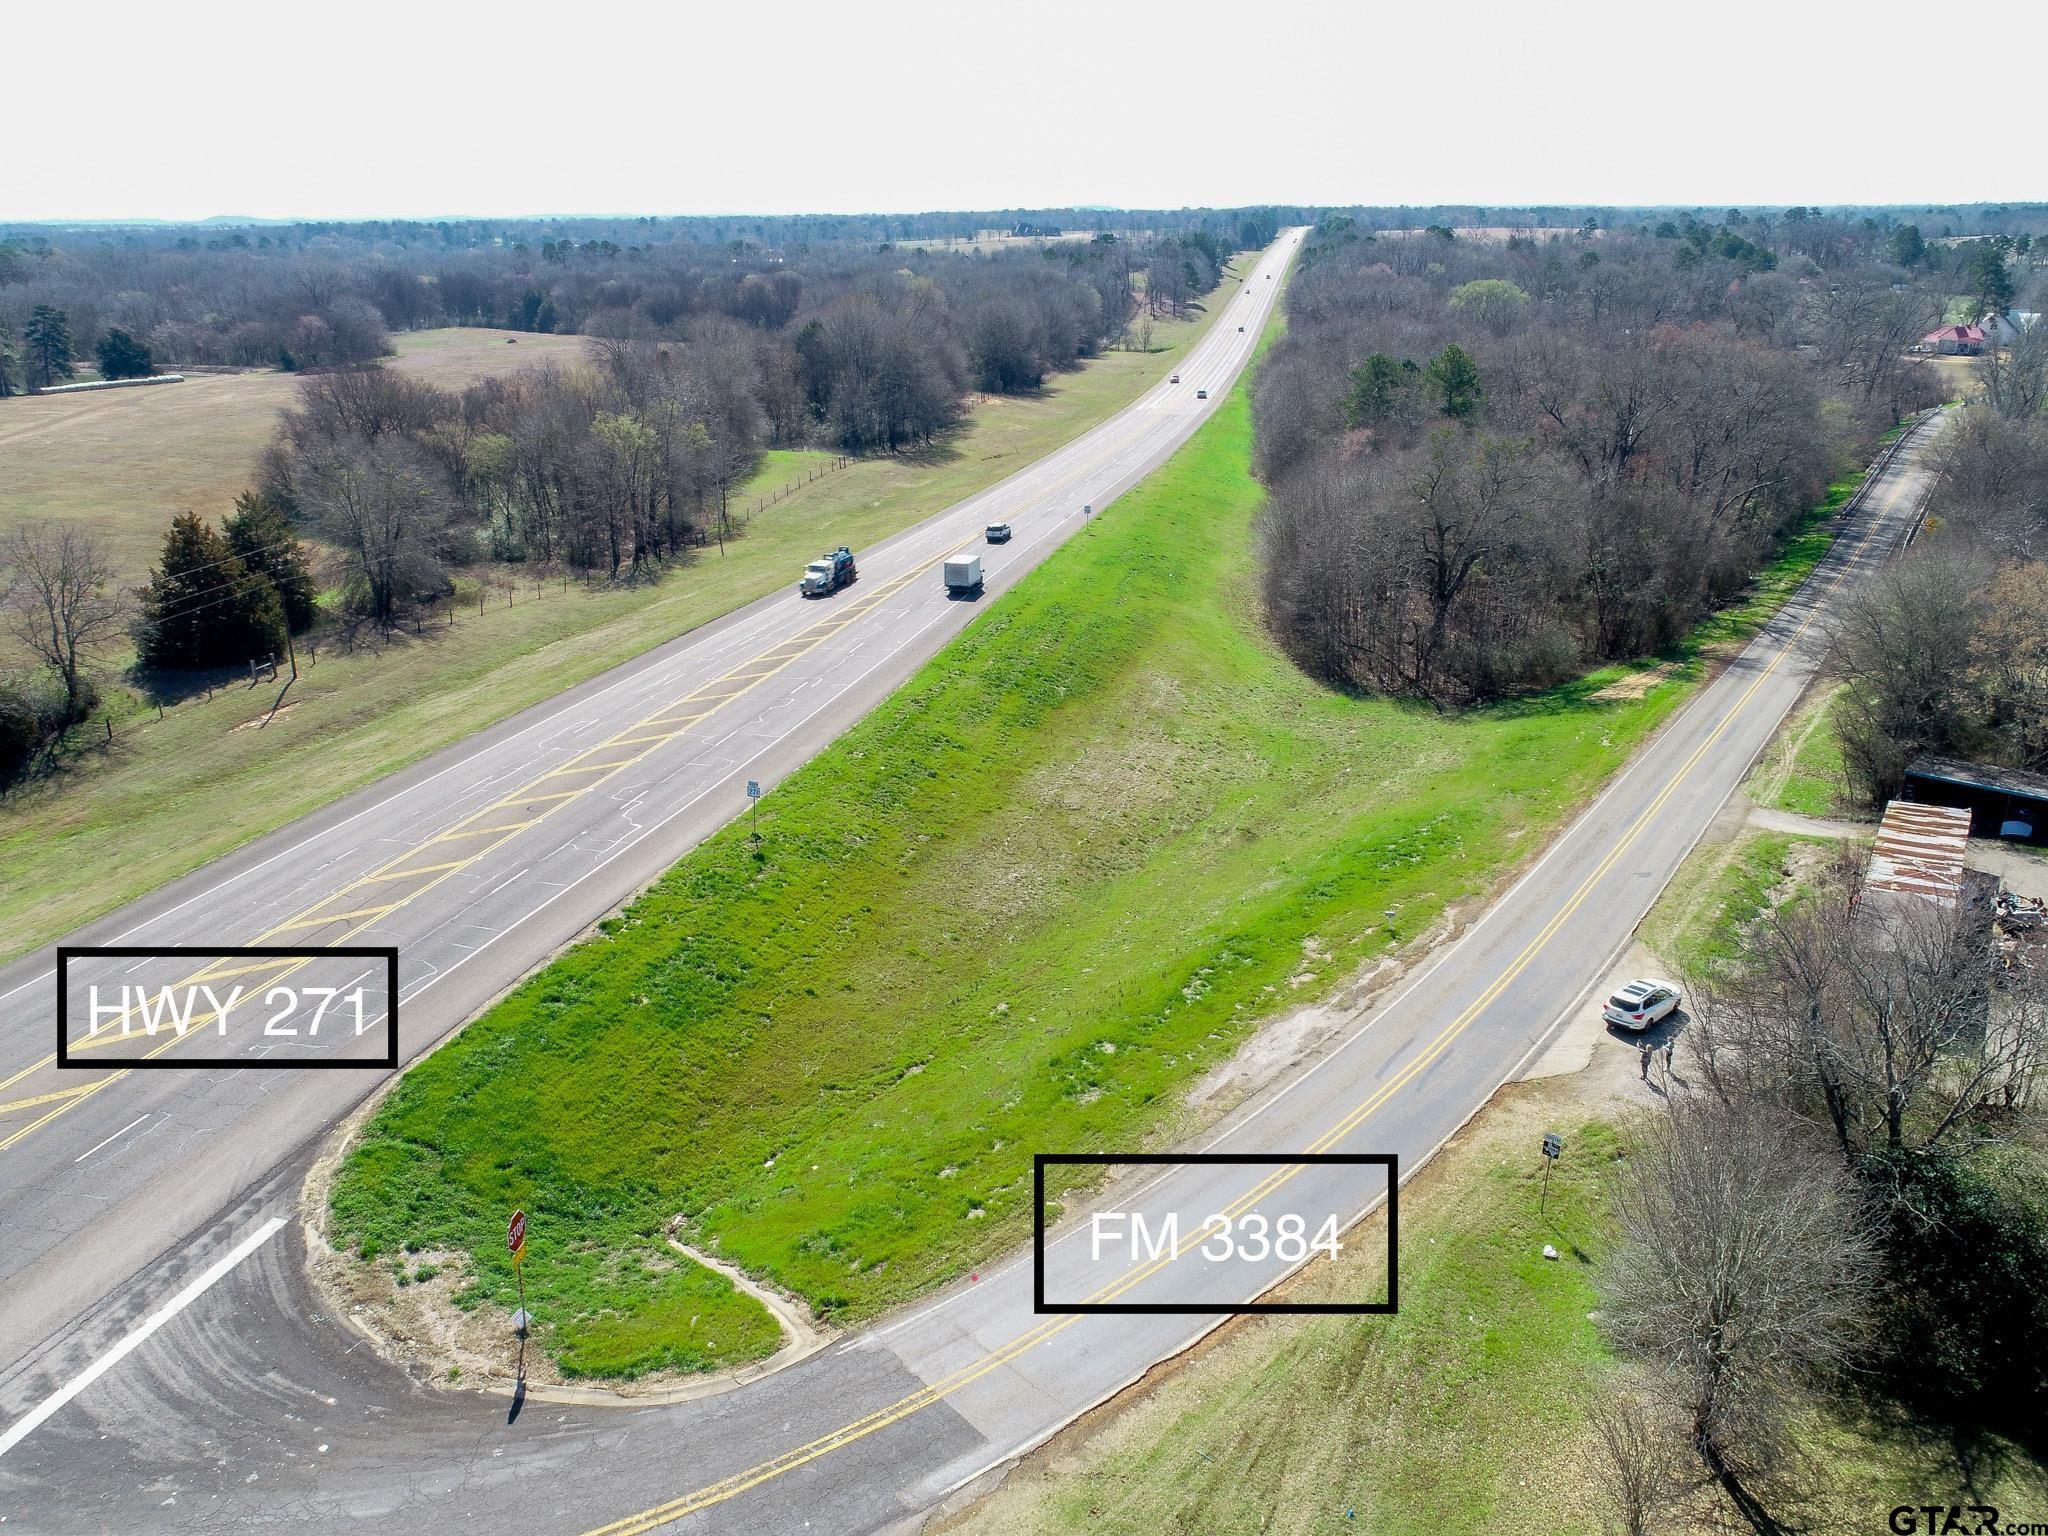 GREAT OPPORTUNITY FOR COMMERCIAL ENDEAVOR!!!  HIGH TRAFFIC LOCATION---SOUTH OF DOWNTOWN PITTSBURG!!!!  2.421 Acres at the intersection of Highway 271 and FM 3384.  Frontage on both roads.  Please call listing agent if interested or to schedule a showing.